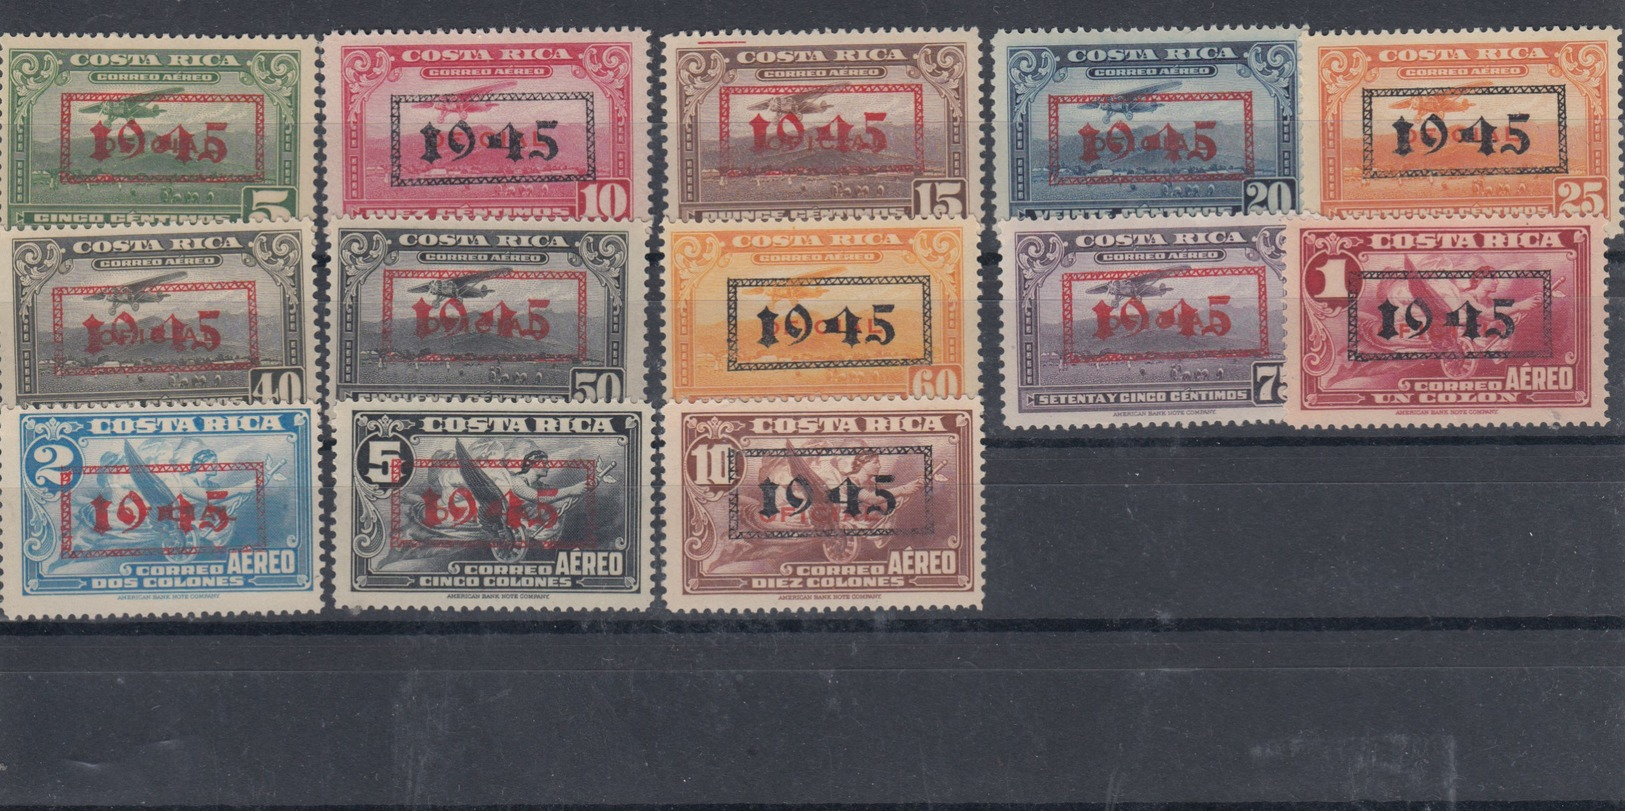 Costa Rica 1945 Airmail - Official Air Stamps Of 1934 Overprinted Set, Unused MNH - Costa Rica